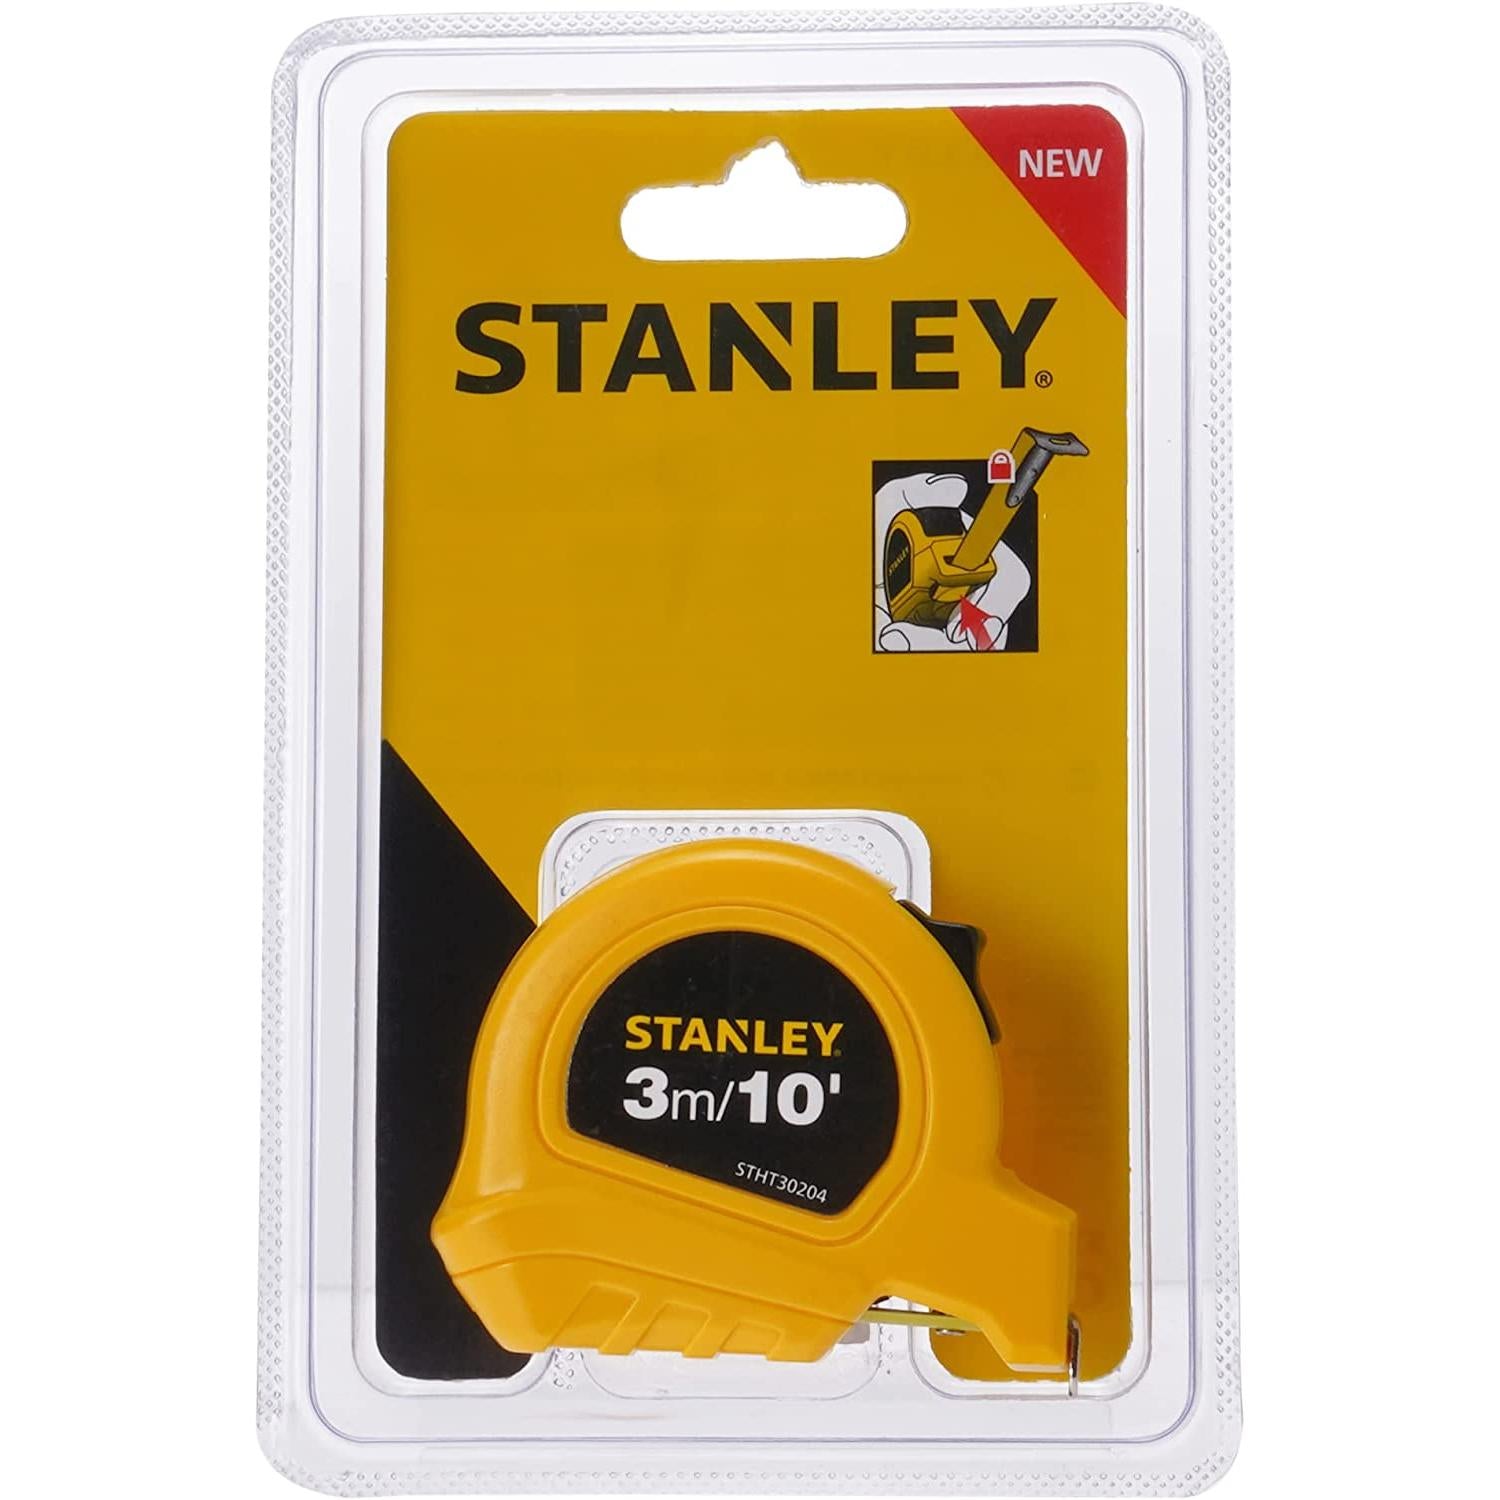 Stanley Basic Tape Measure 3m Power Tool Services